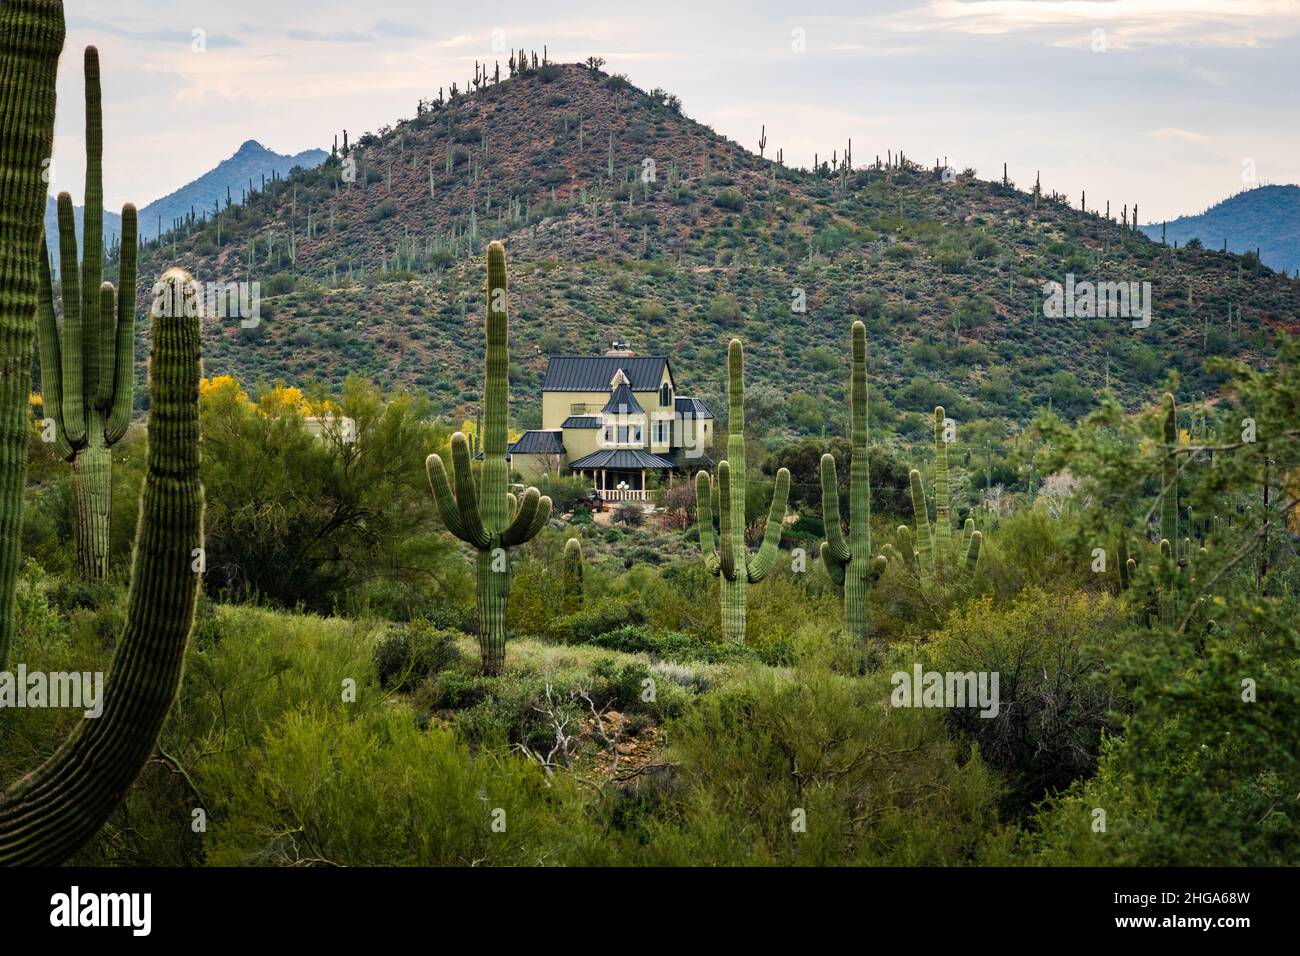 Green Victorian Style house by the mountain and tall saguaro cacti near Spur Cross Ranch Conservation Area in Cave Creek, Arizona, United States. Stock Photo